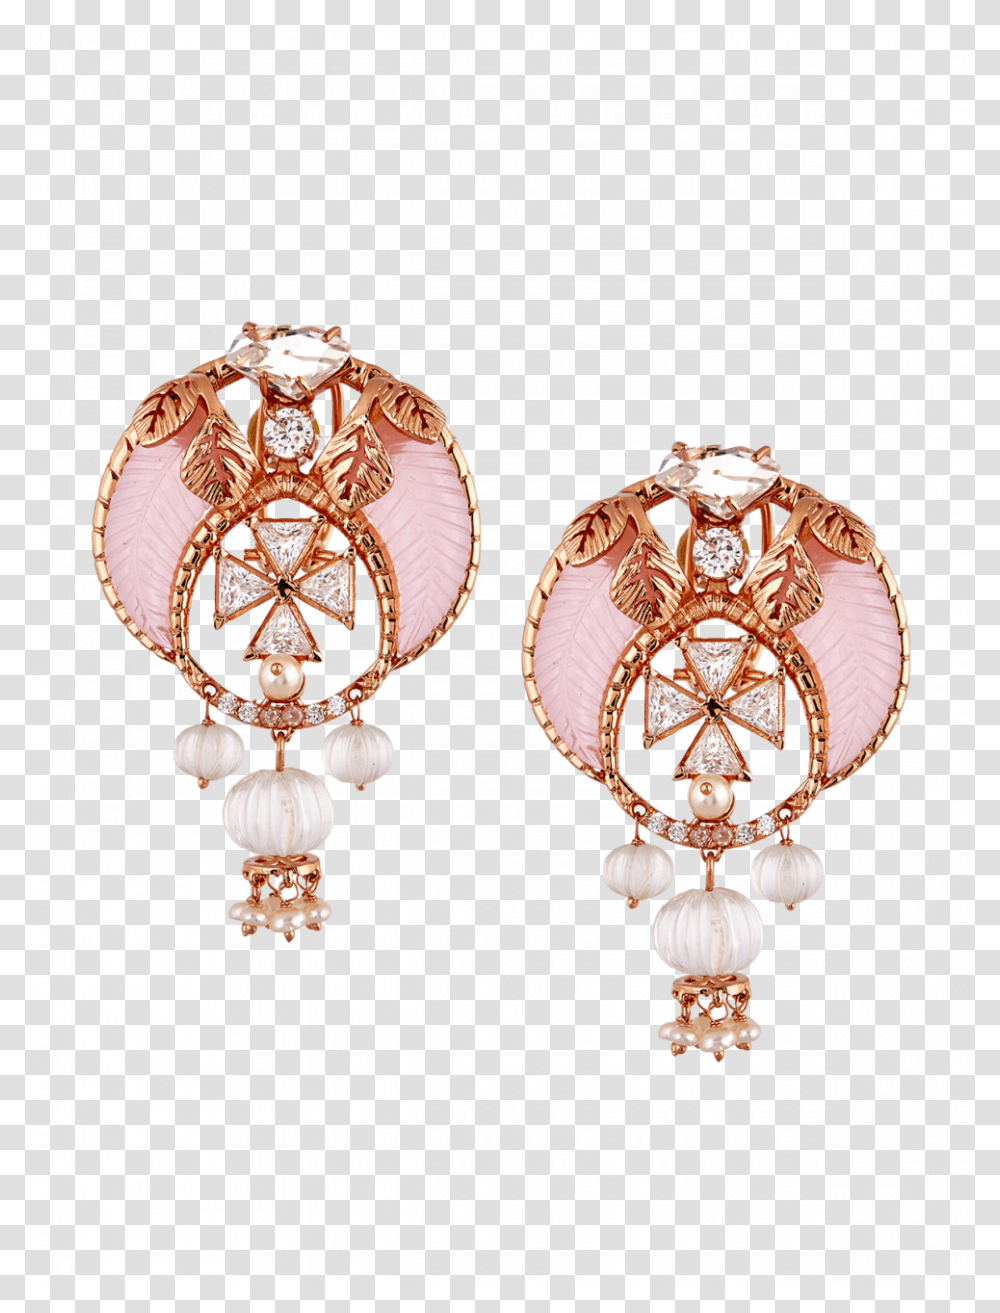 Earrings, Jewelry, Accessories, Accessory, Brooch Transparent Png